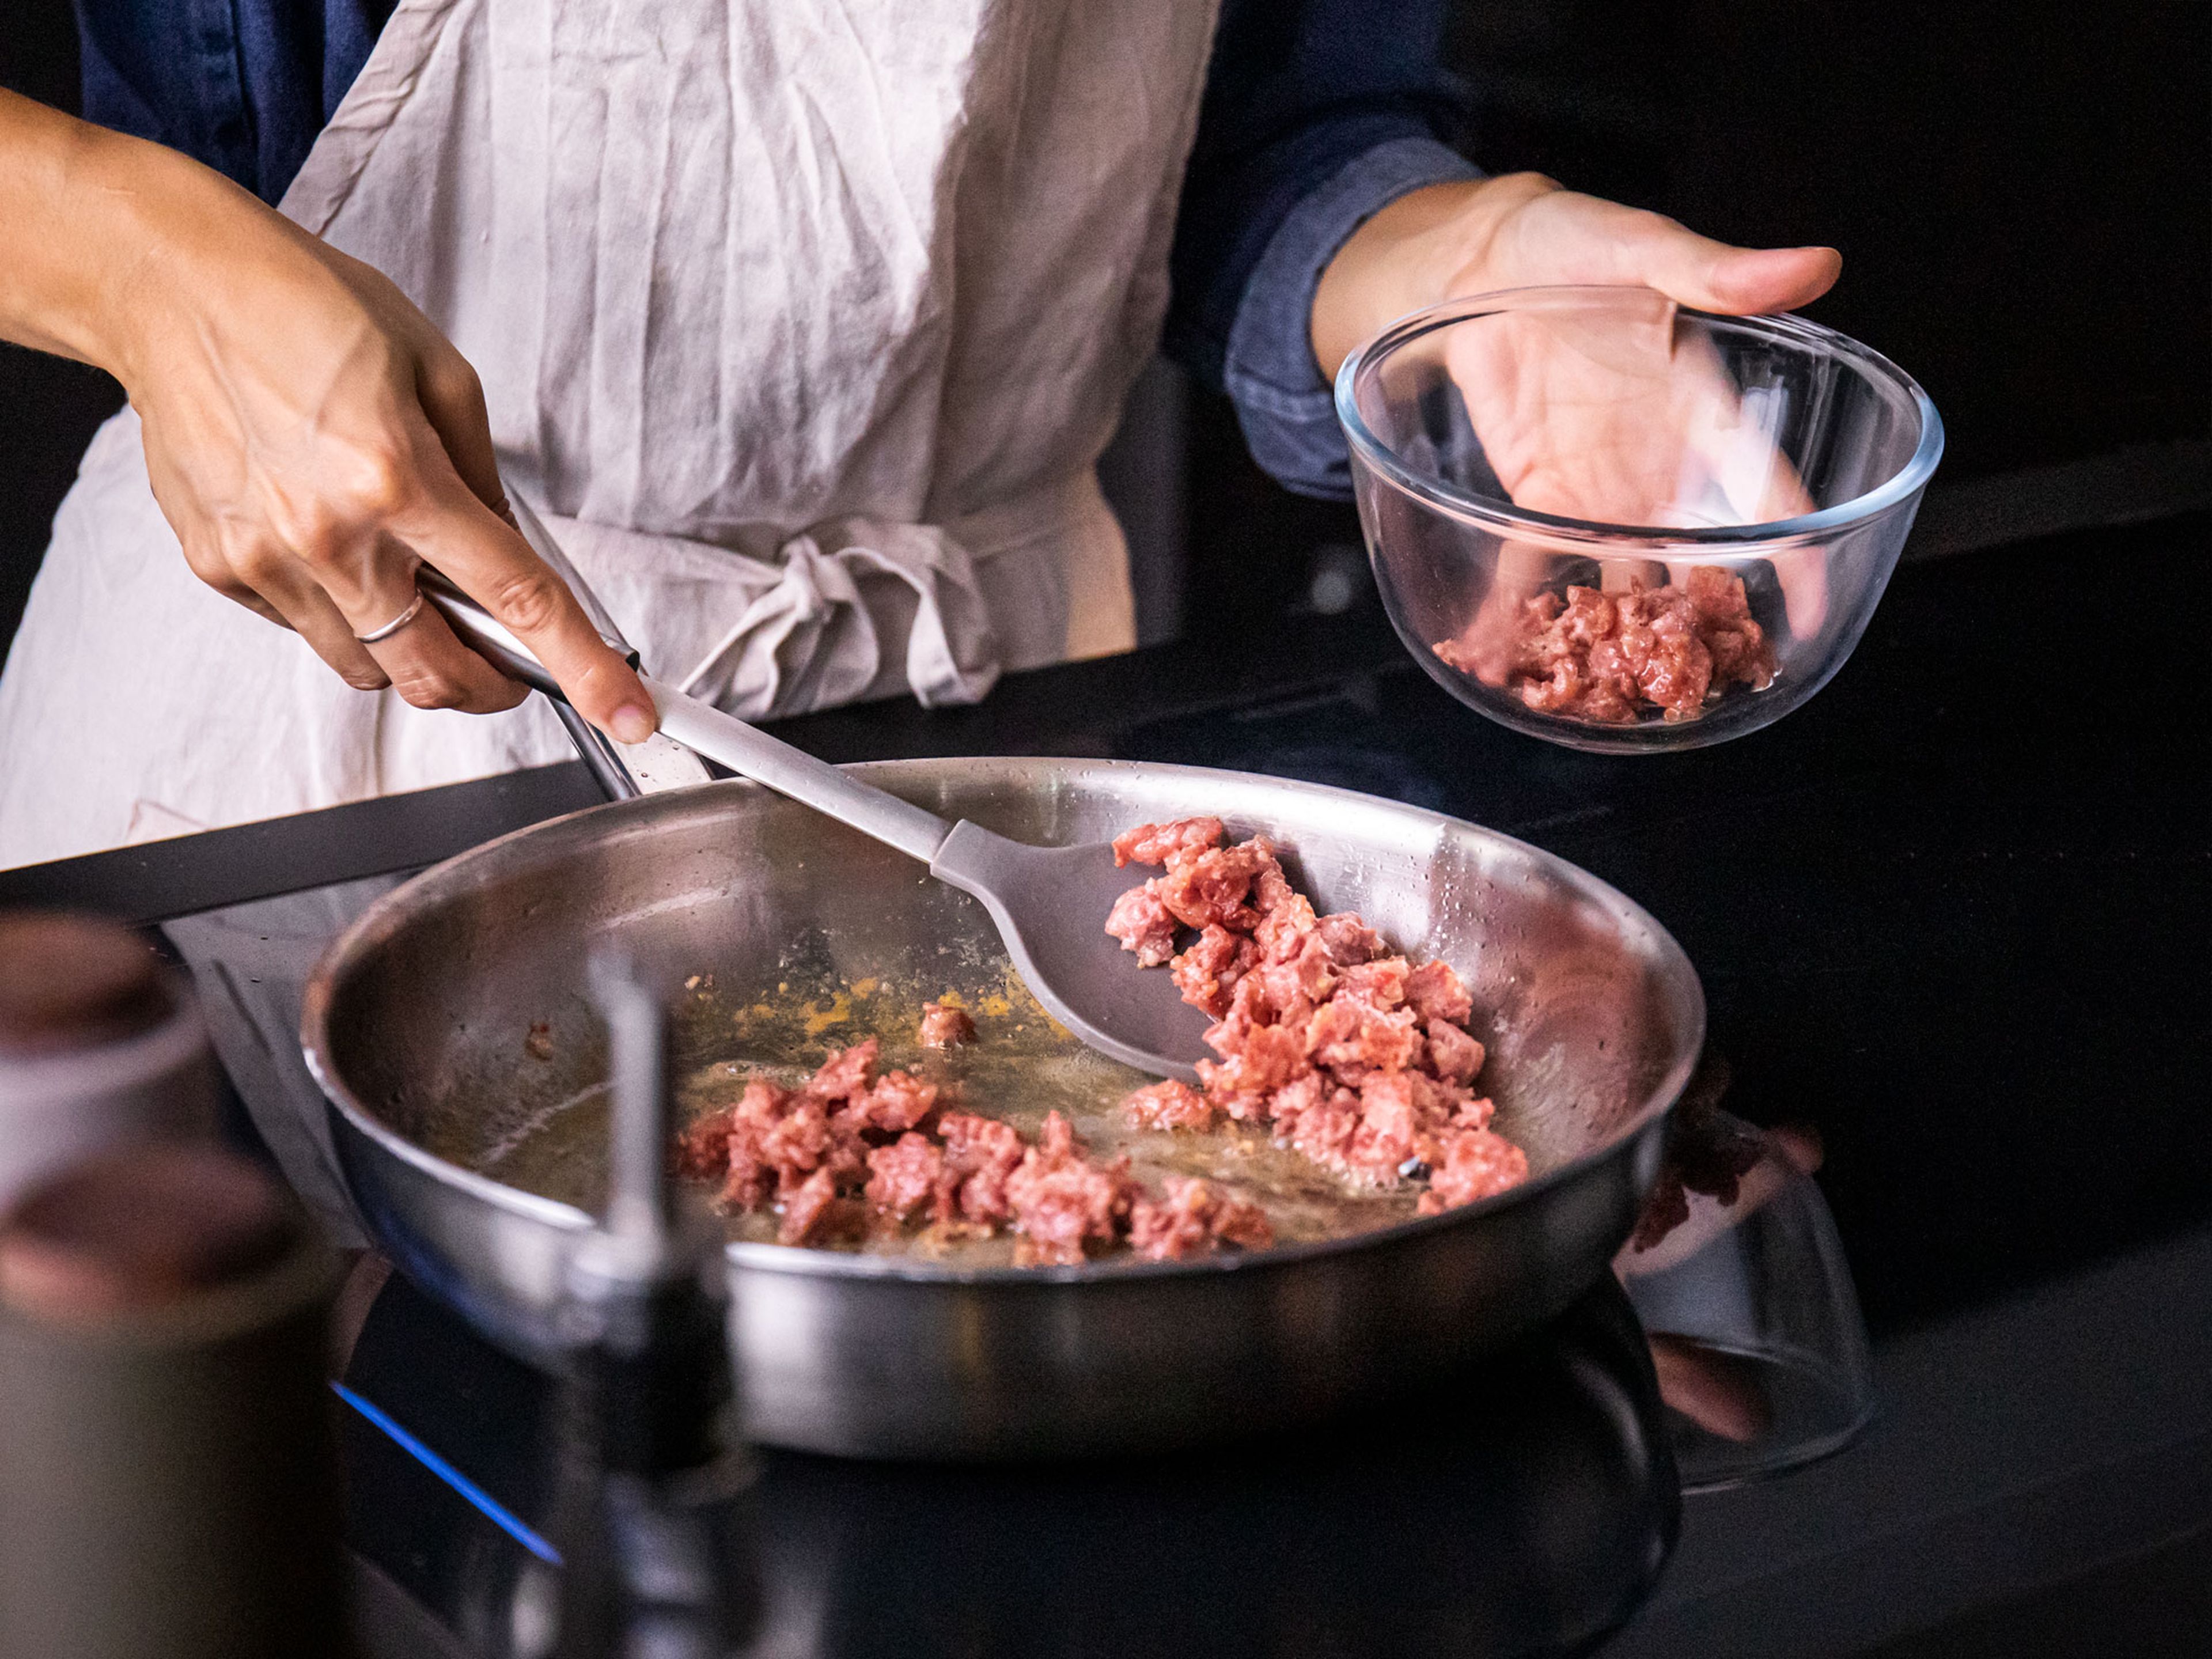 Set a large frying pan over medium-high heat. Remove sausage from the casing (if necessary) and brown it in the frying pan, breaking it up with a cooking spoon. Season with salt and pepper. Once cooked through and a bit crisp, remove and set aside. Drain any excess fat if needed.